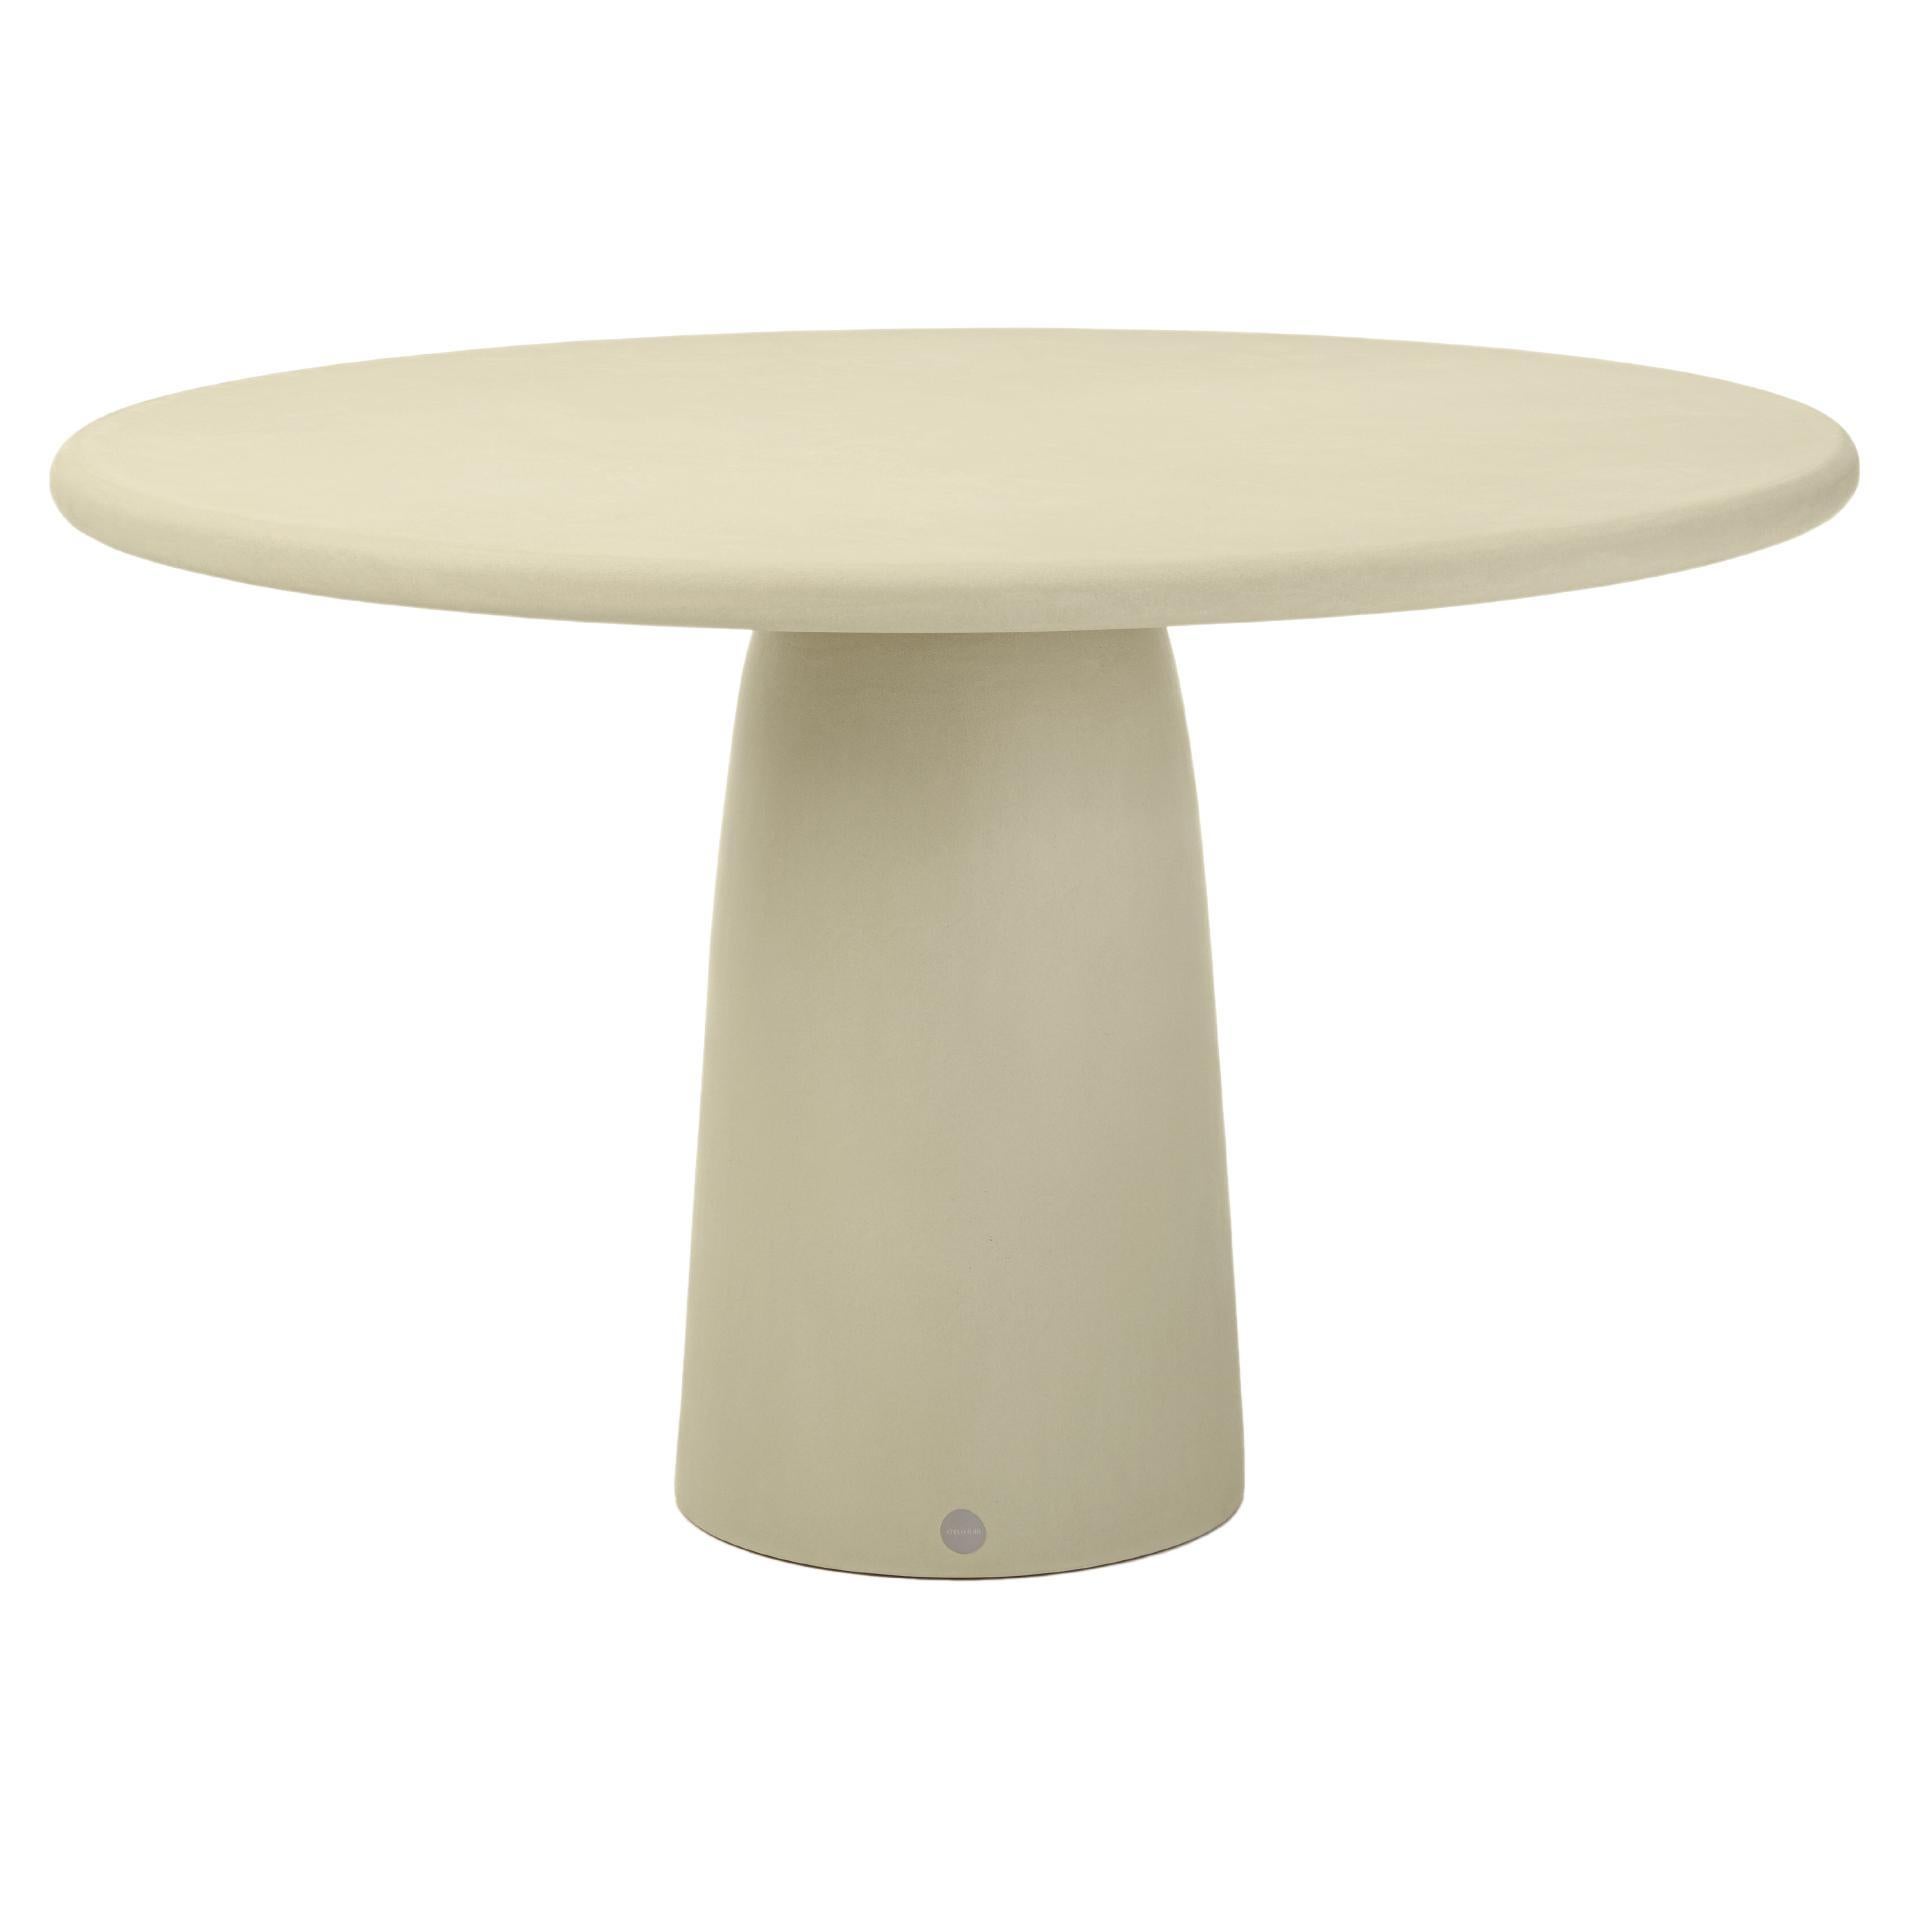 Round Natural Plaster Dining Table "Menhir" 140 by Isabelle Beaumont